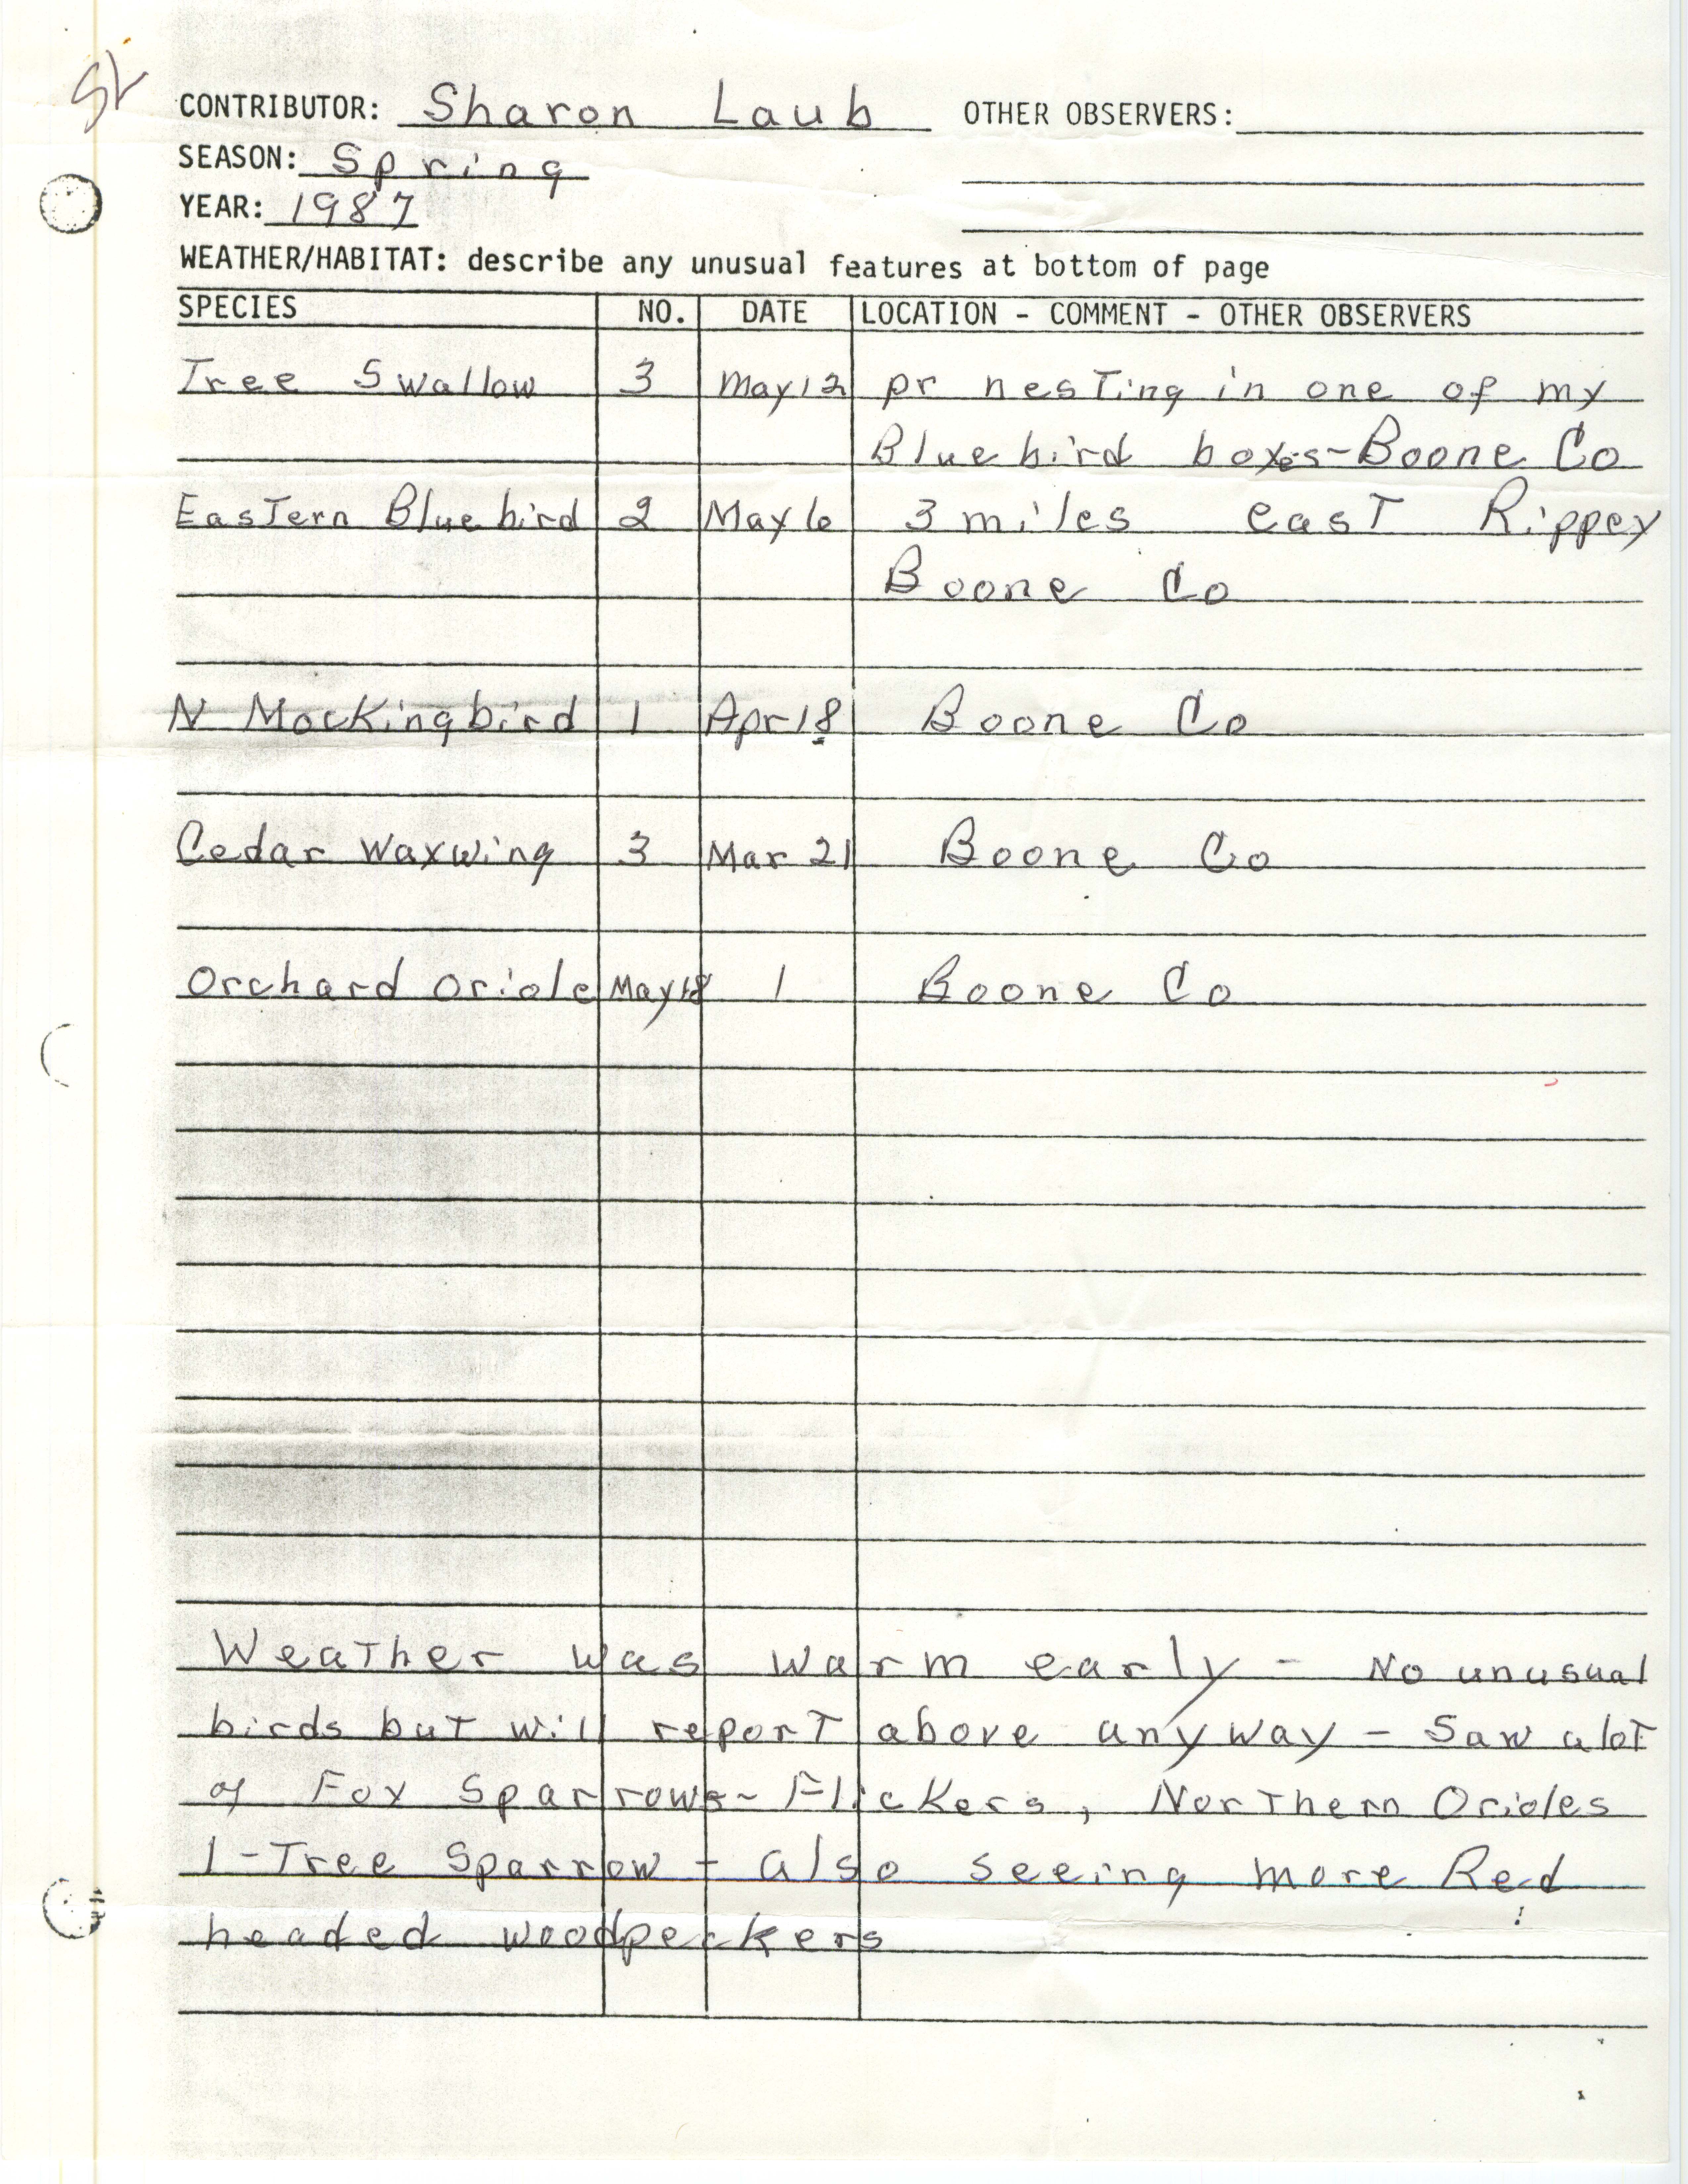 Field notes contributed by Sharon Laub, spring 1987